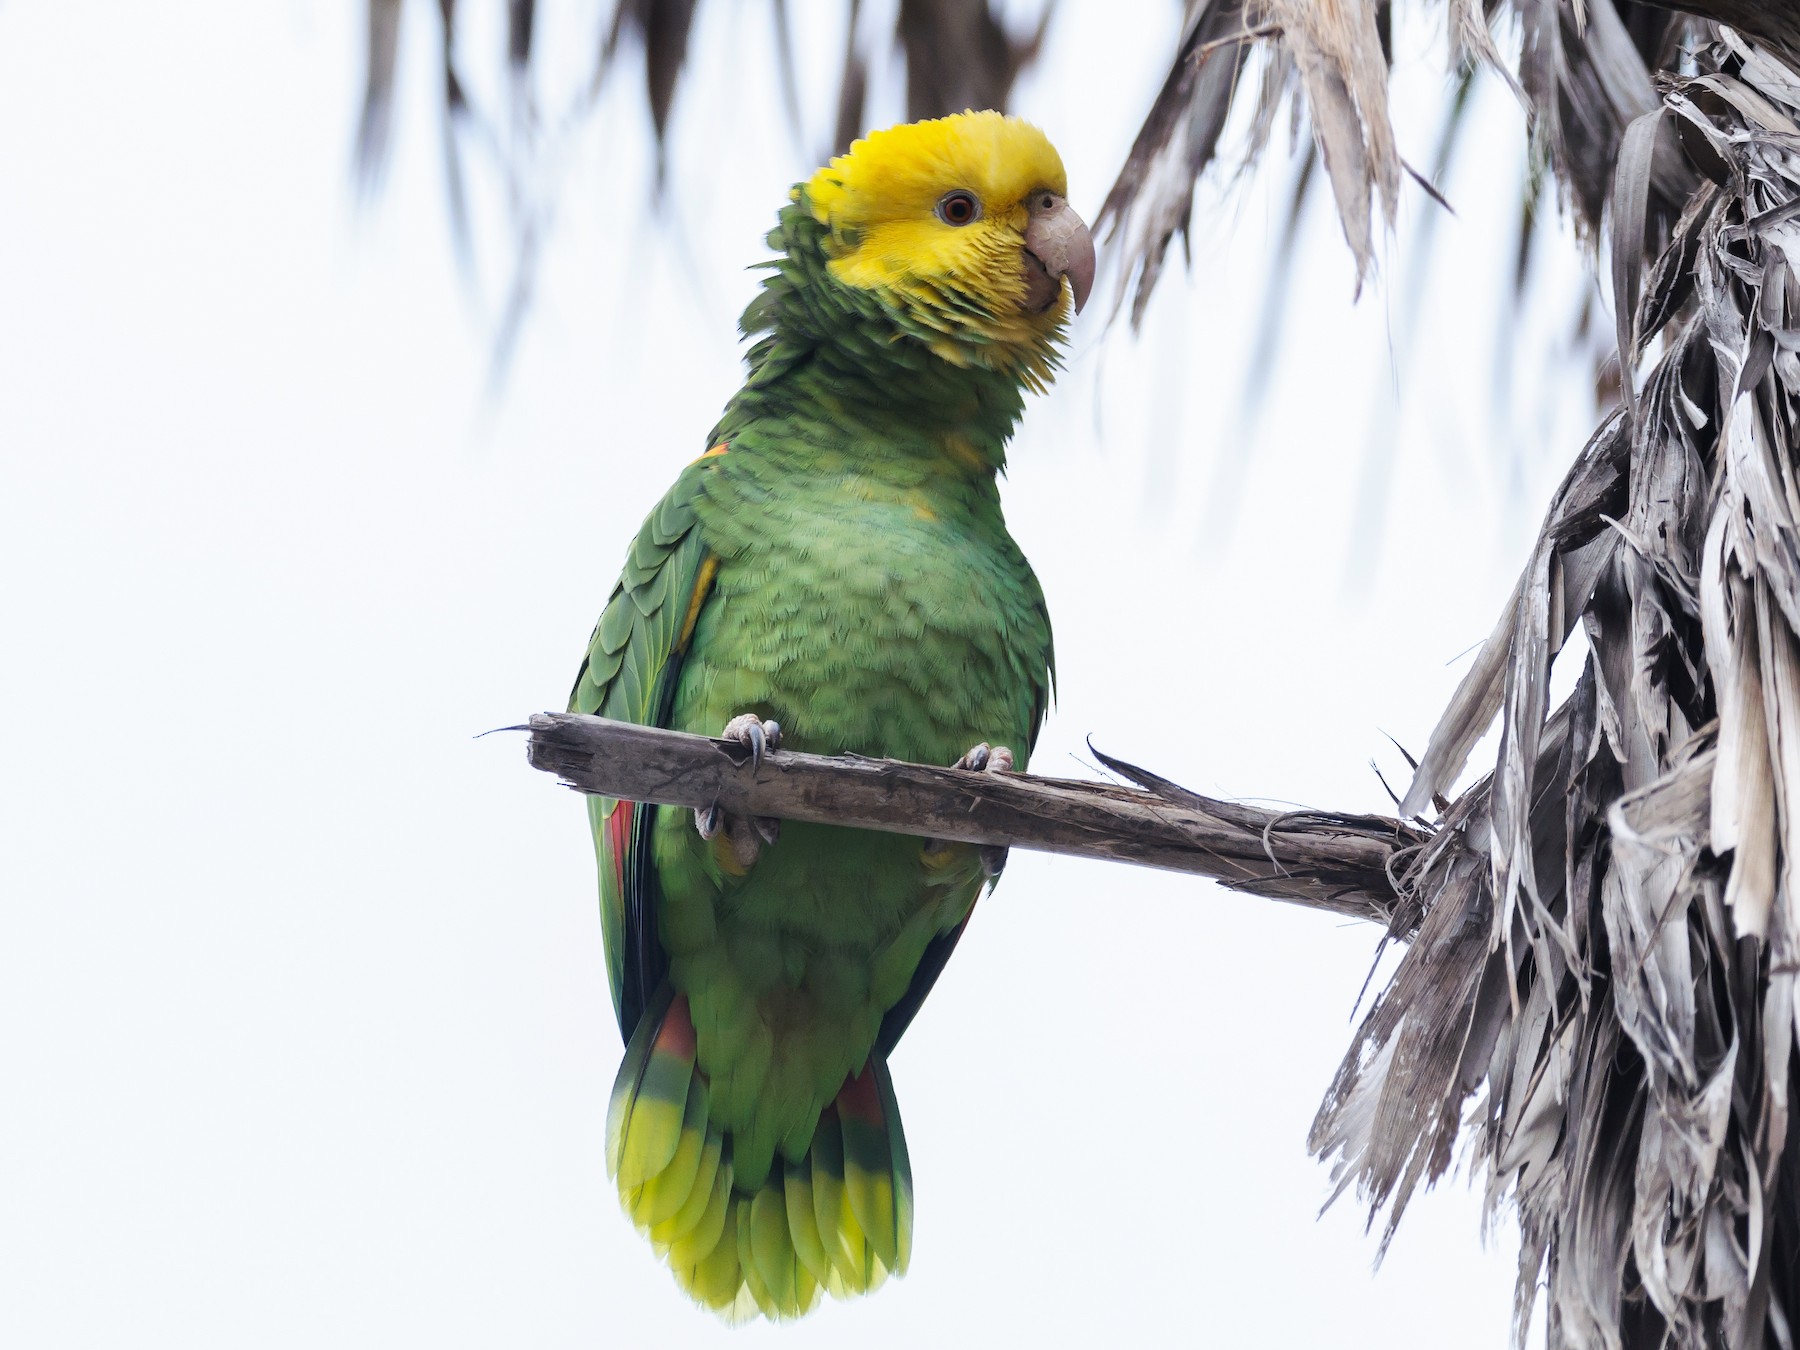 Yellow-headed Parrot - David Lawrence